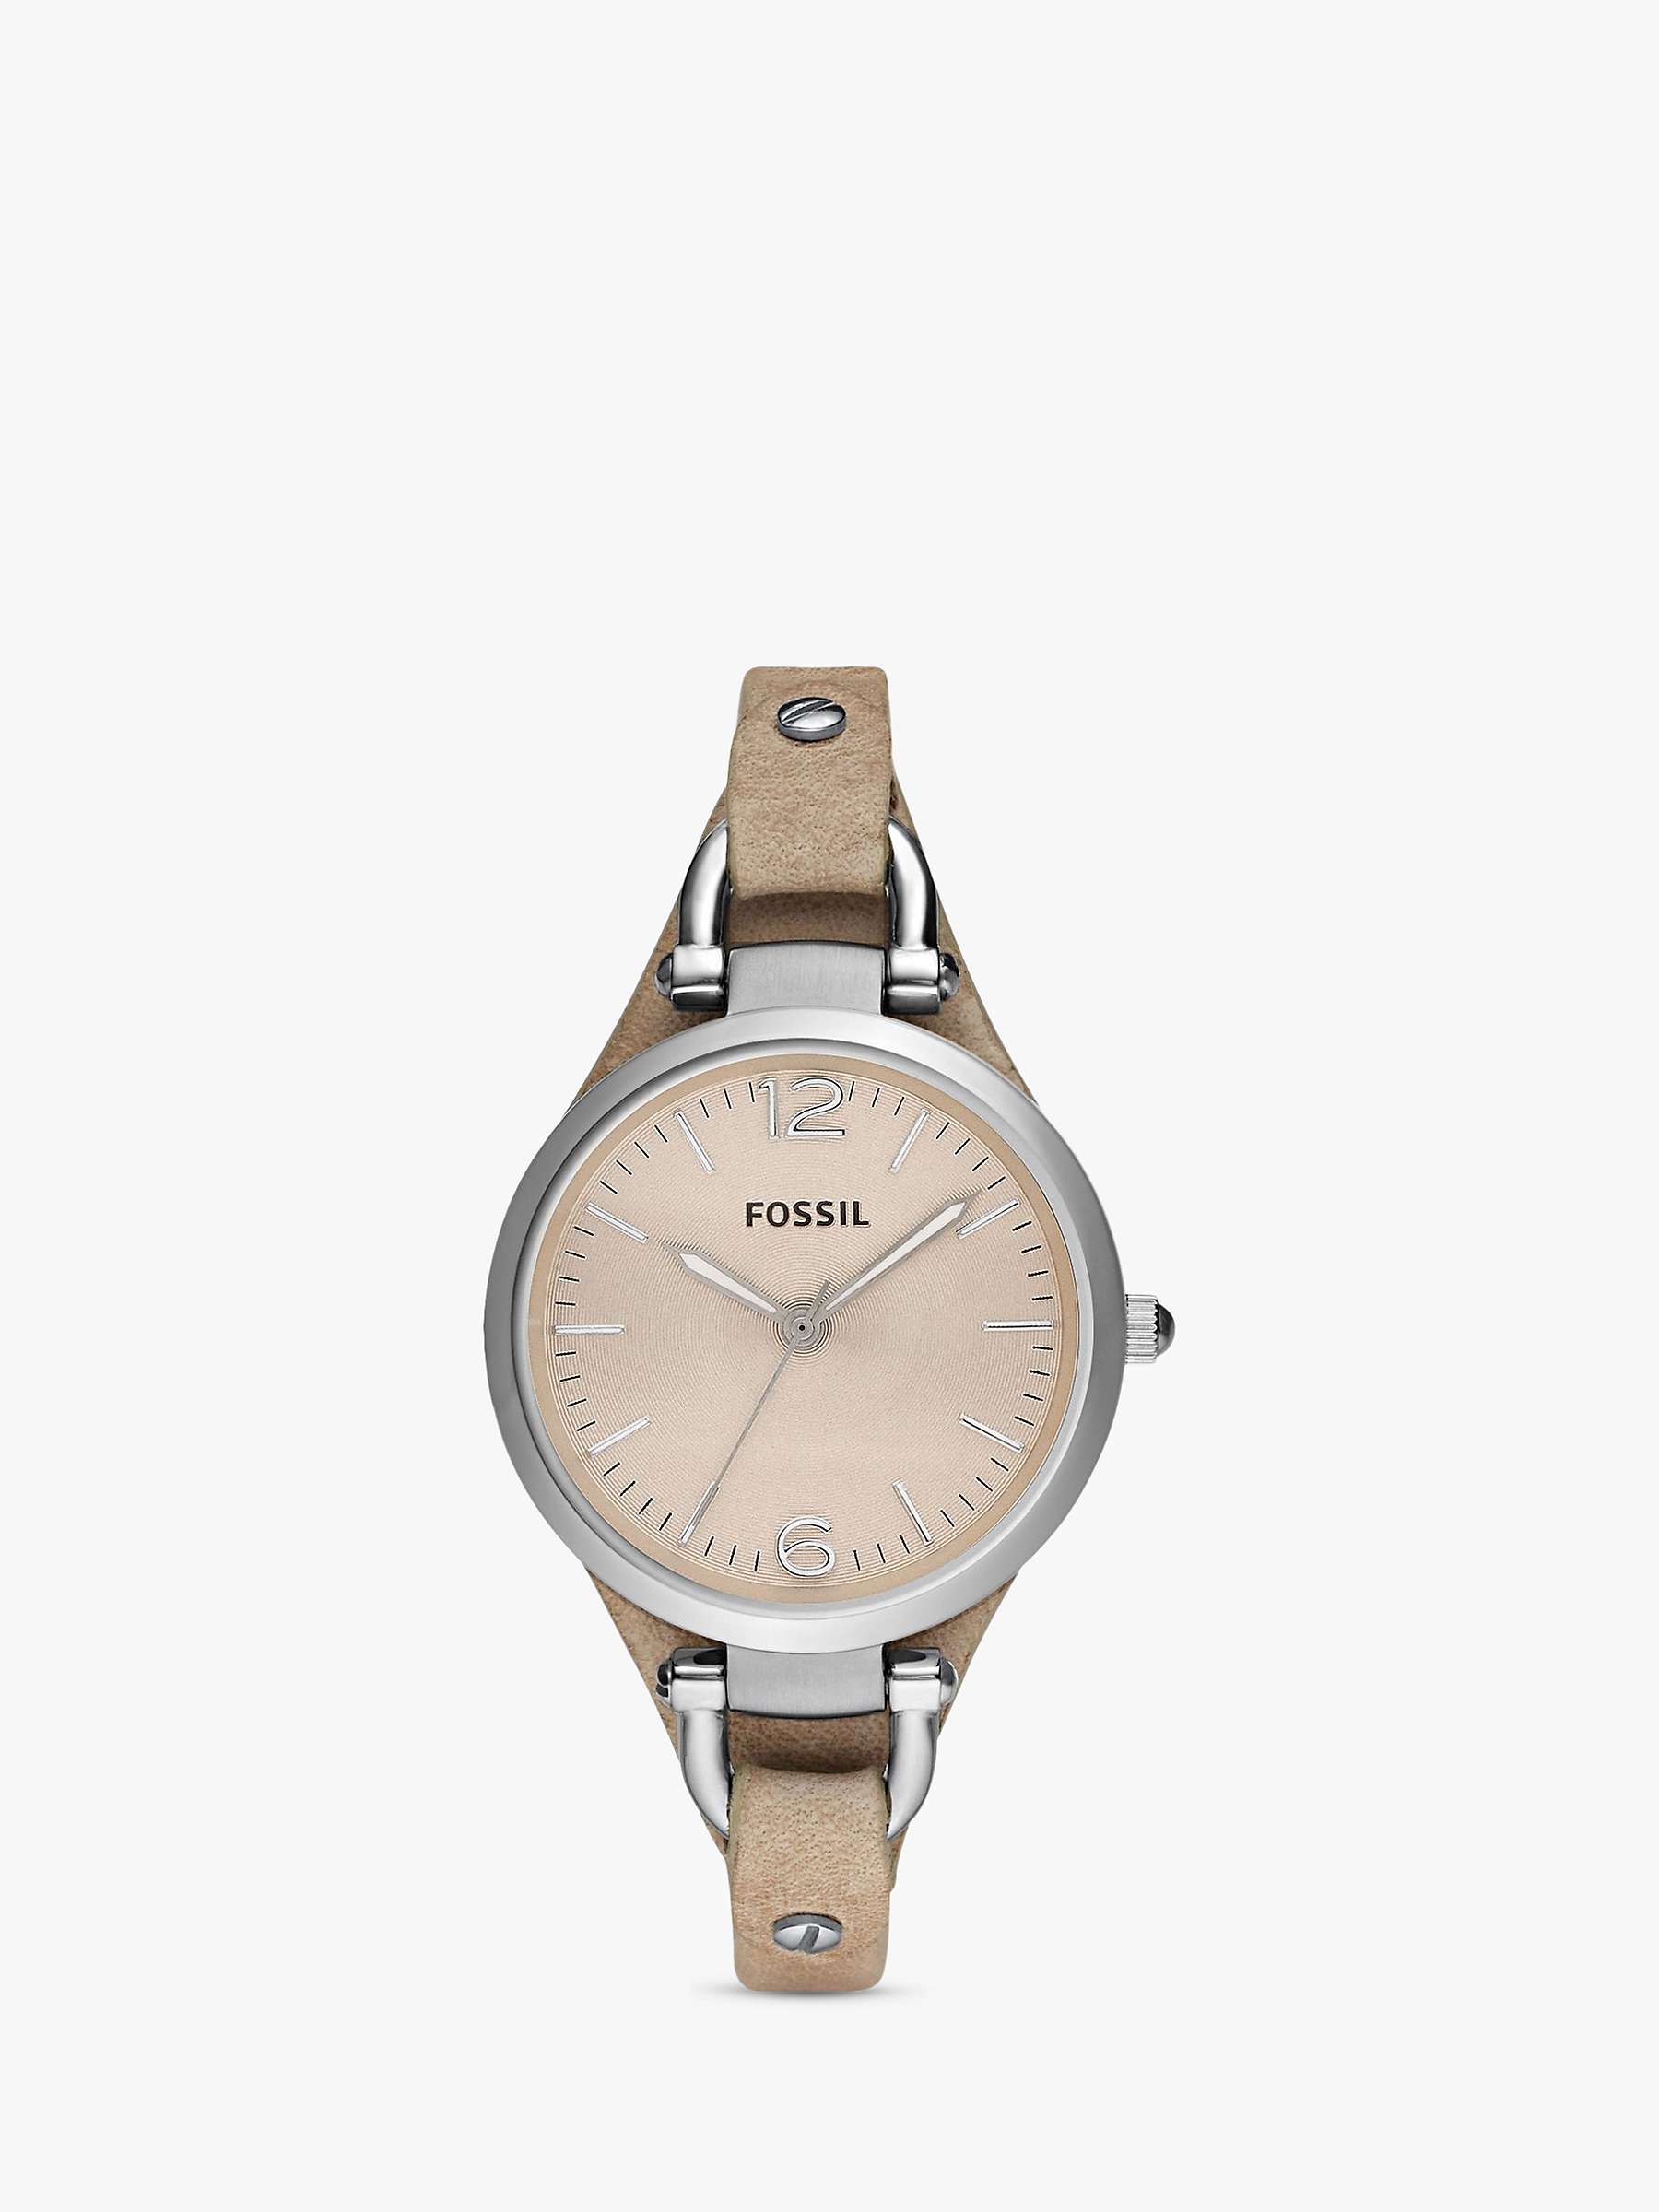 Buy Fossil ES2830 Georgia Women's Leather Strap Watch, Sand Online at johnlewis.com